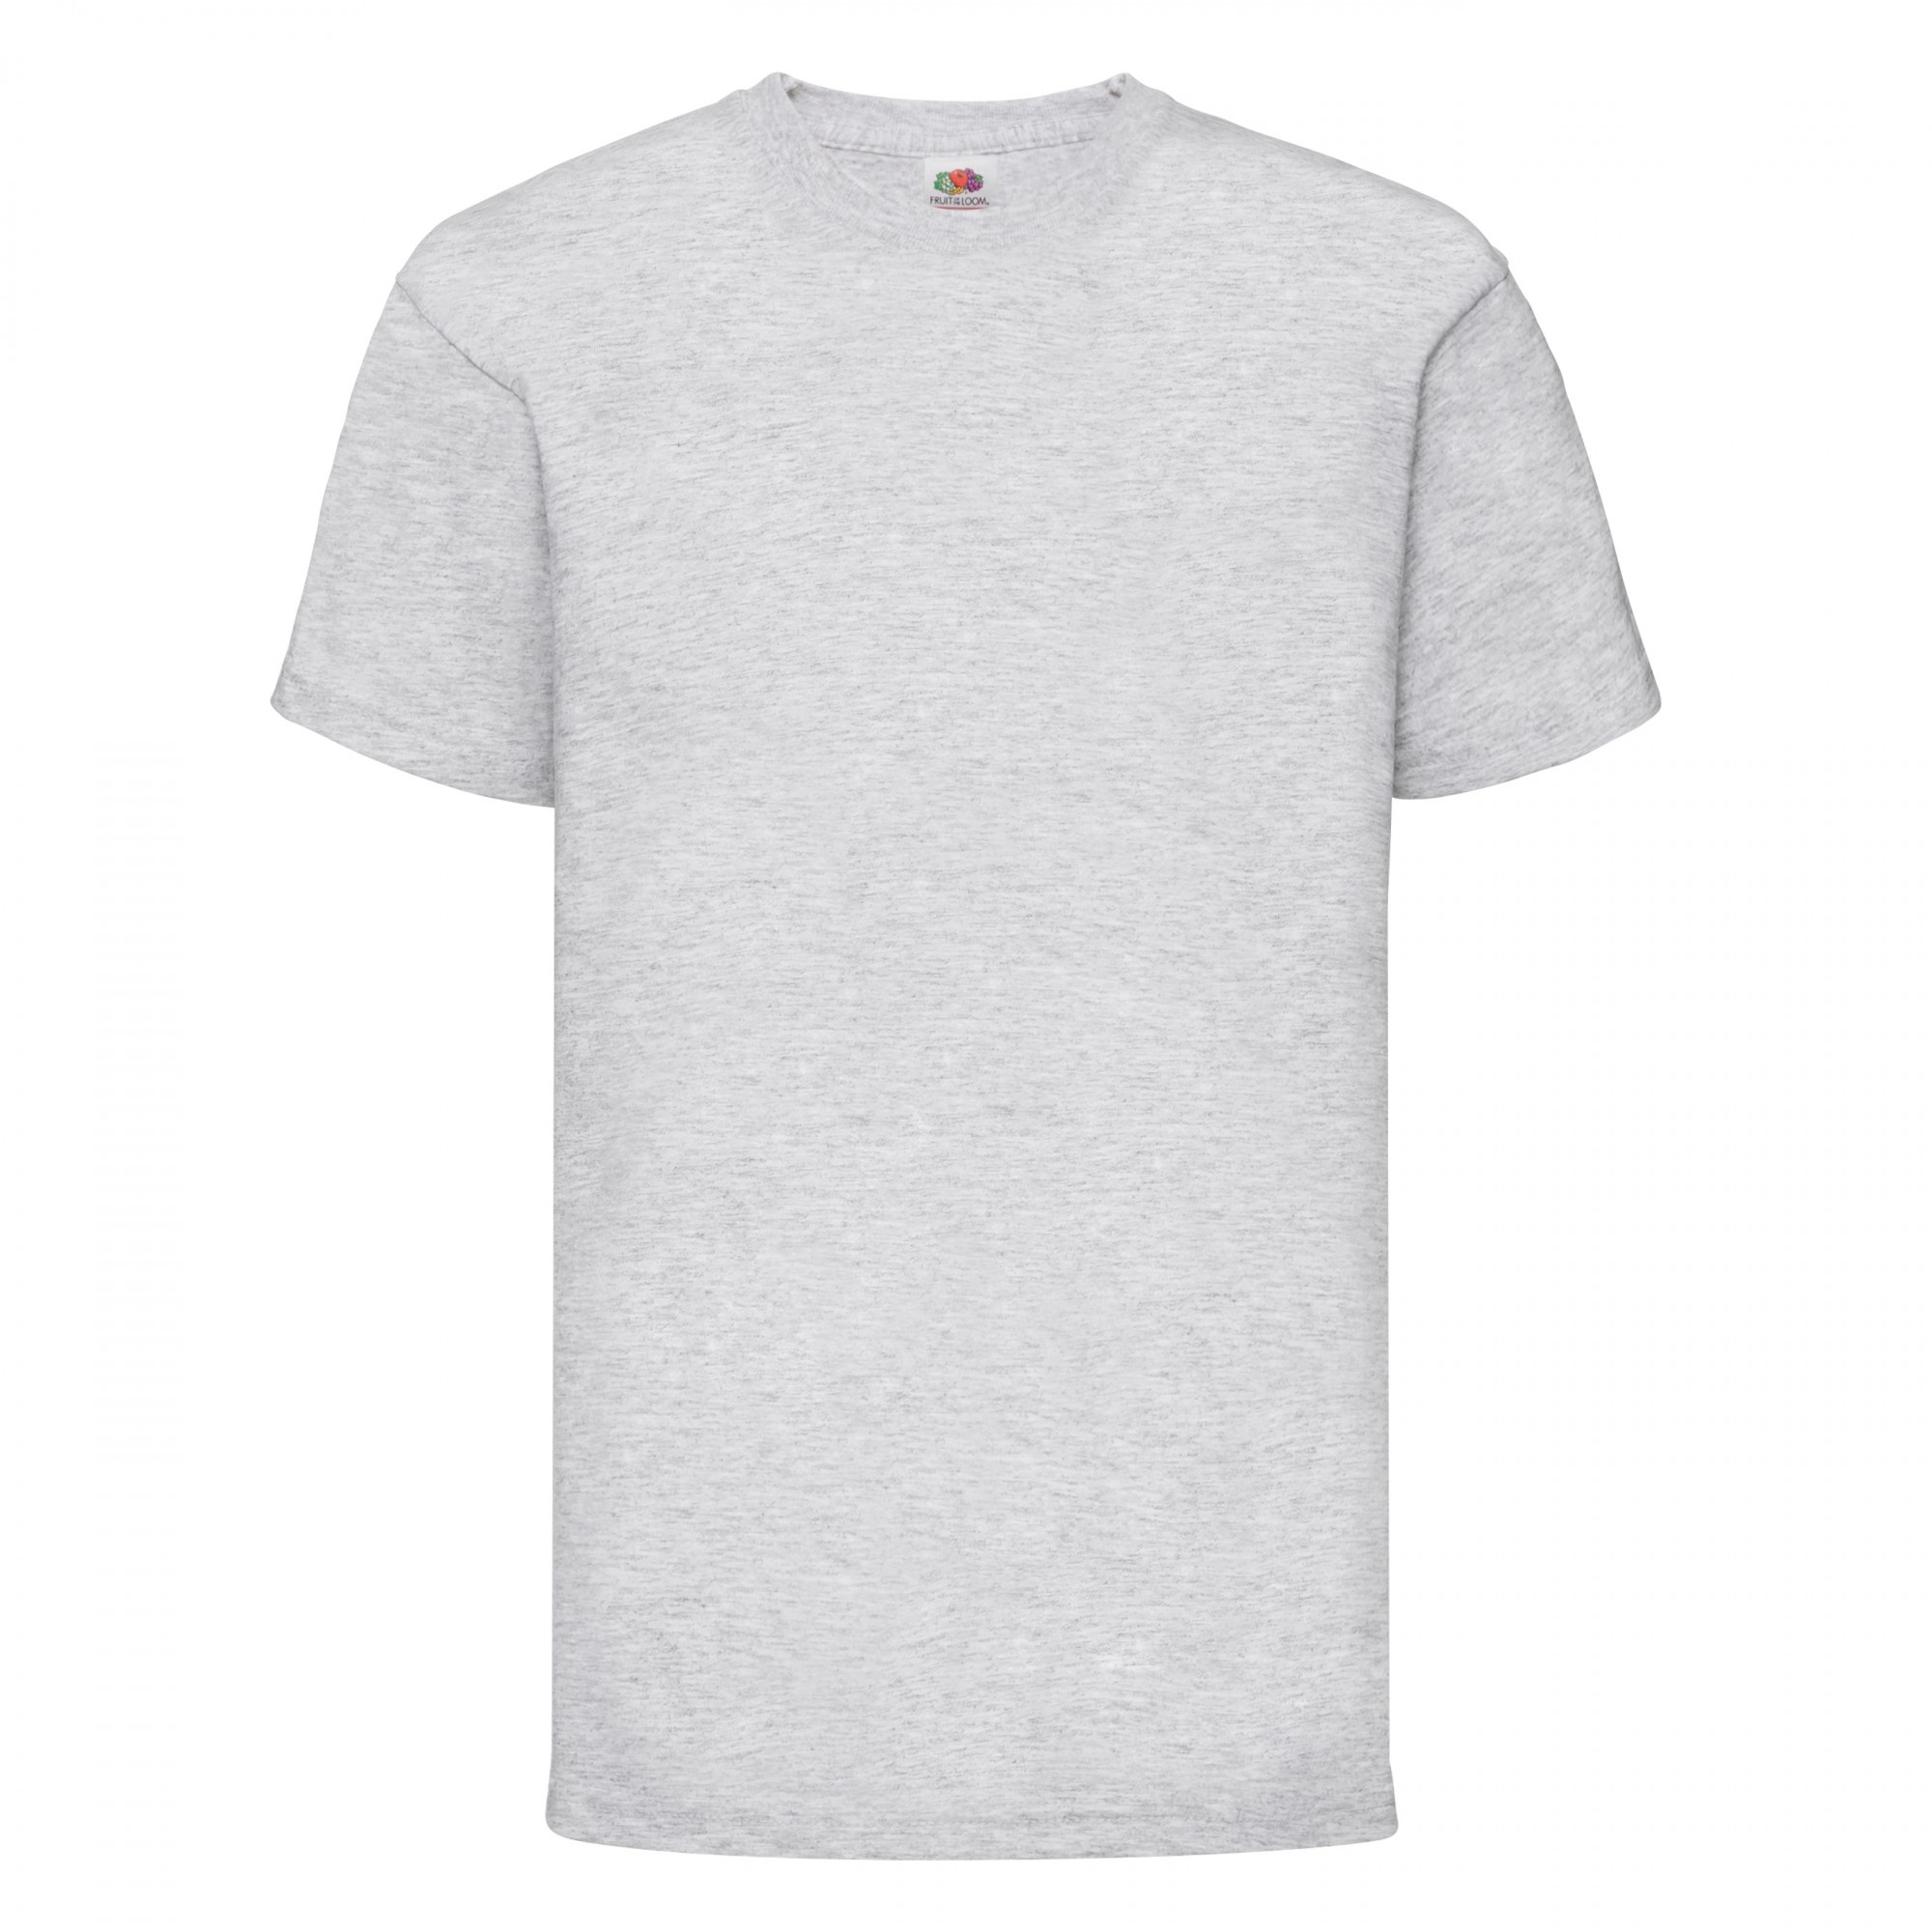 T-shirt Fruit Of The Loom - gris - 